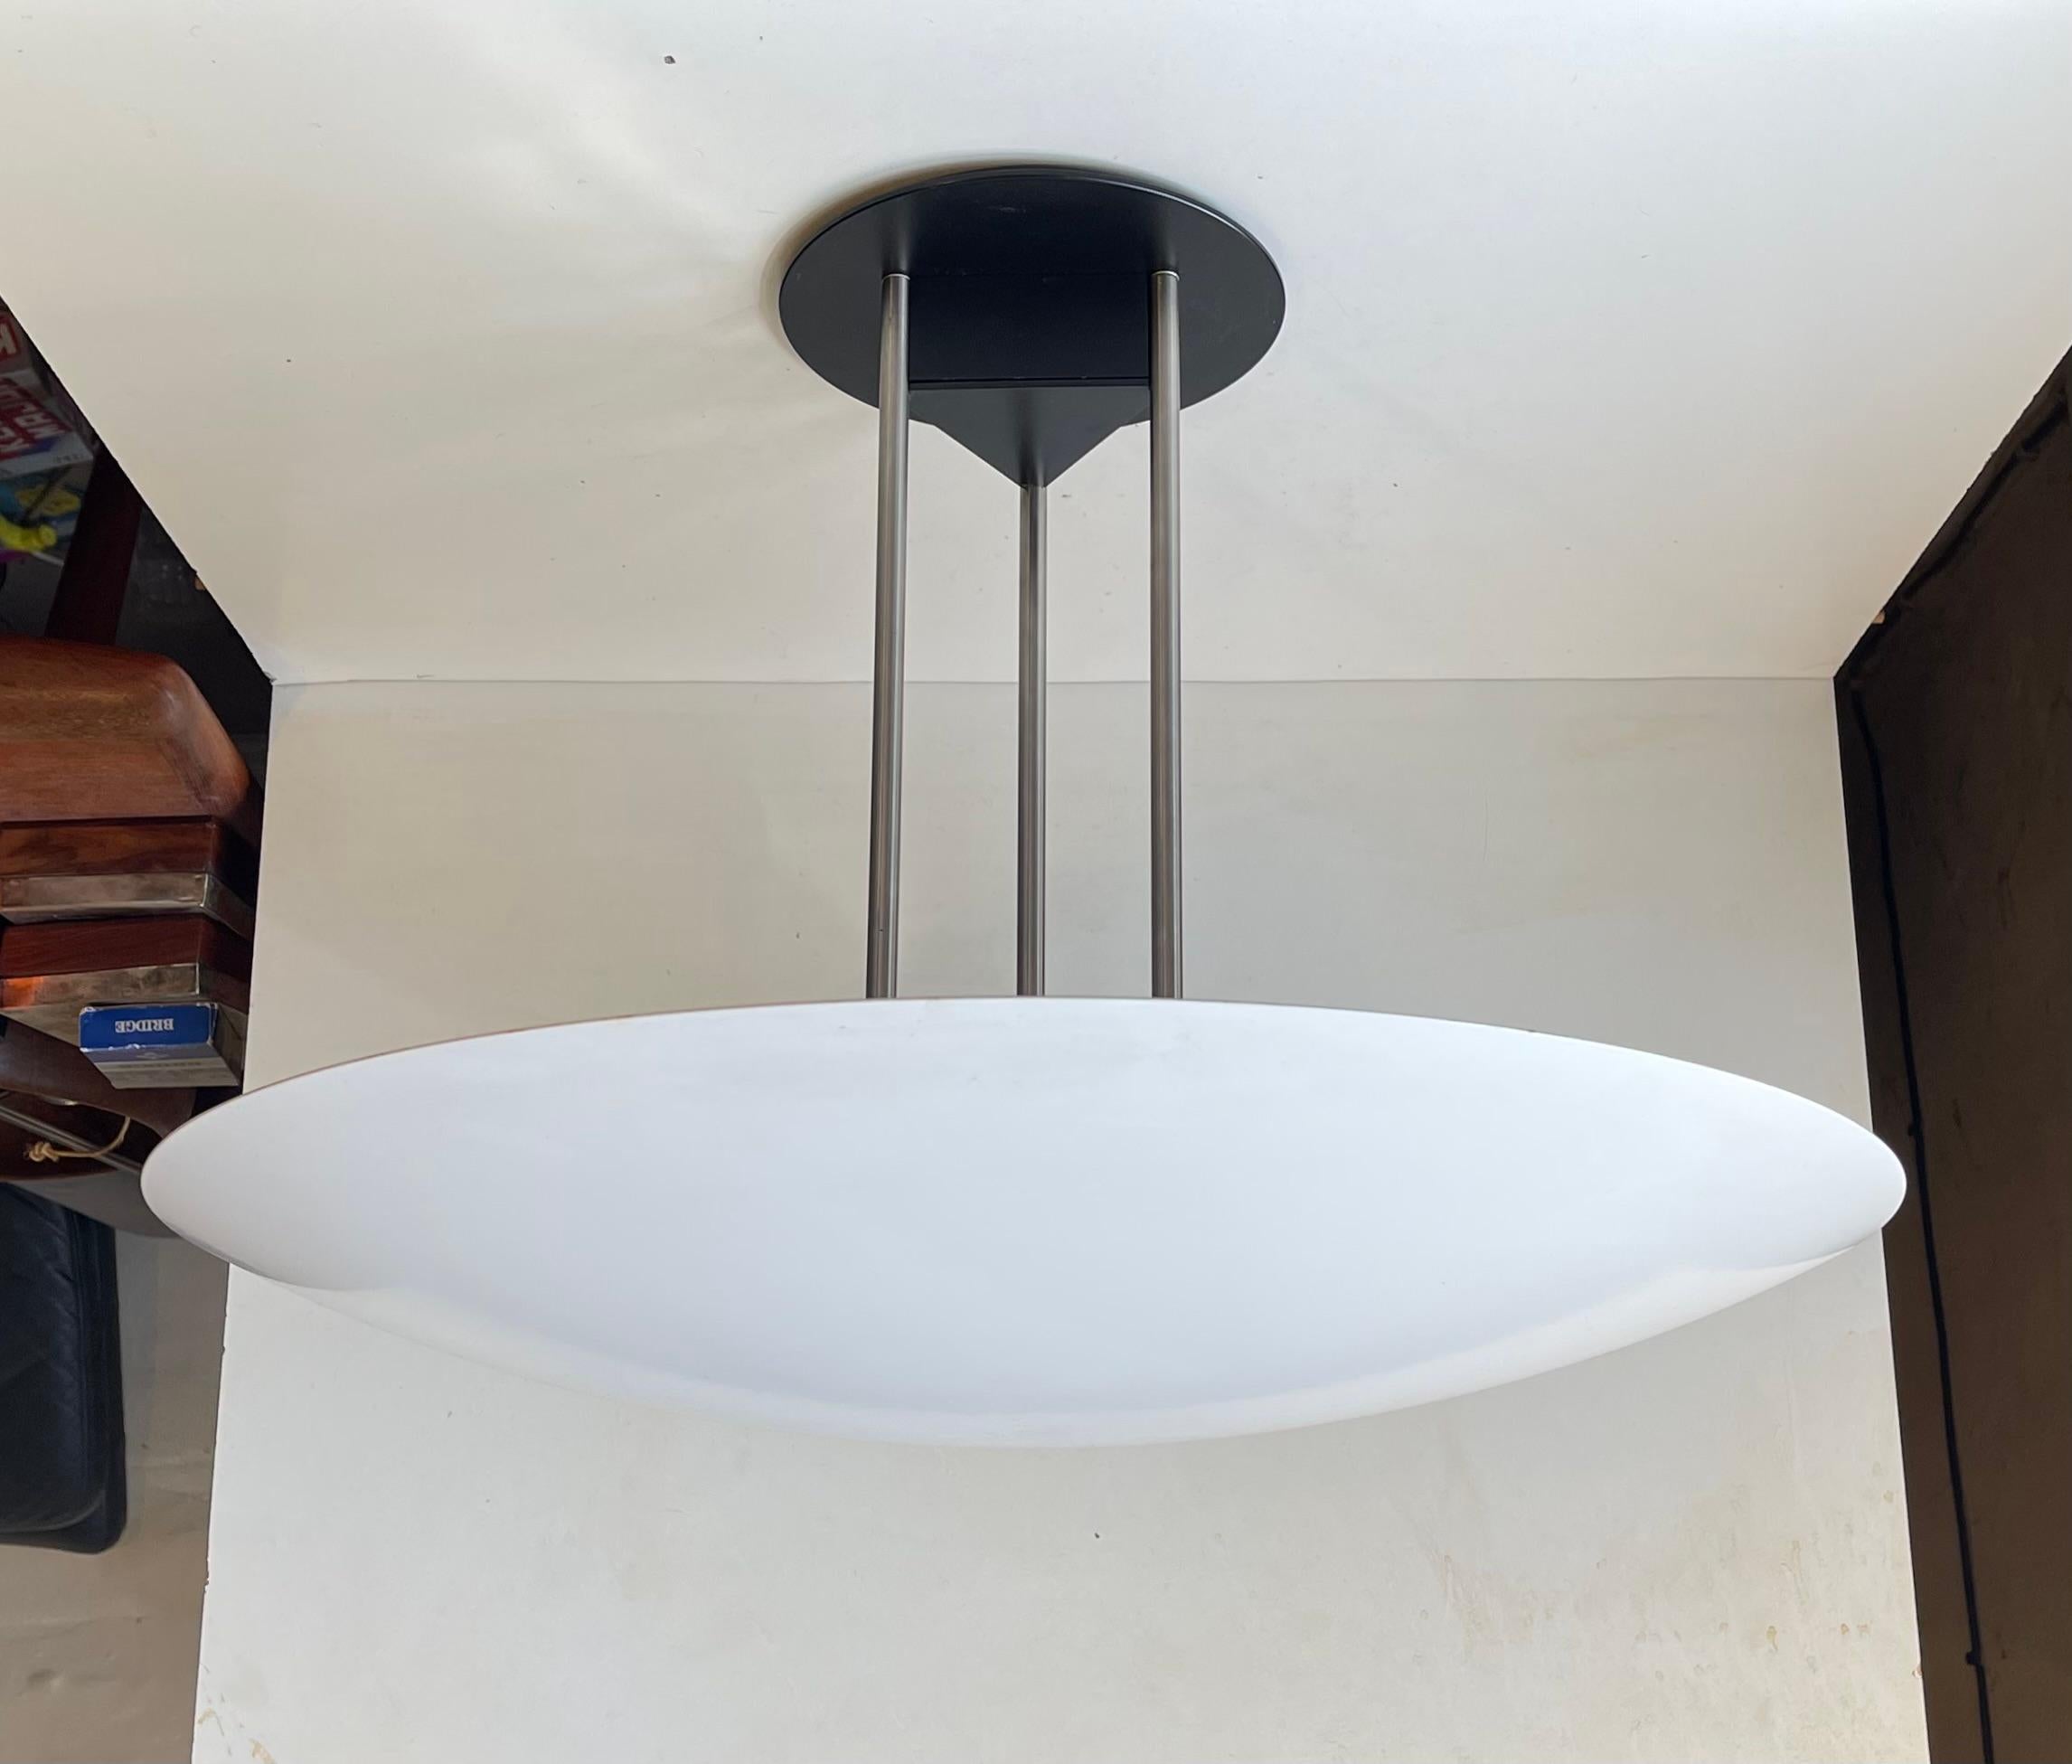 A rare minimalist fixed ceiling lamp or flush mount. It is called Gino and was designed in the late 1970s by Hans Agne Jakobsen, Bjarne Frost and Ole Jespersen. This example from Nordisk Solar in Denmark was made during the 1980s. Measurements: